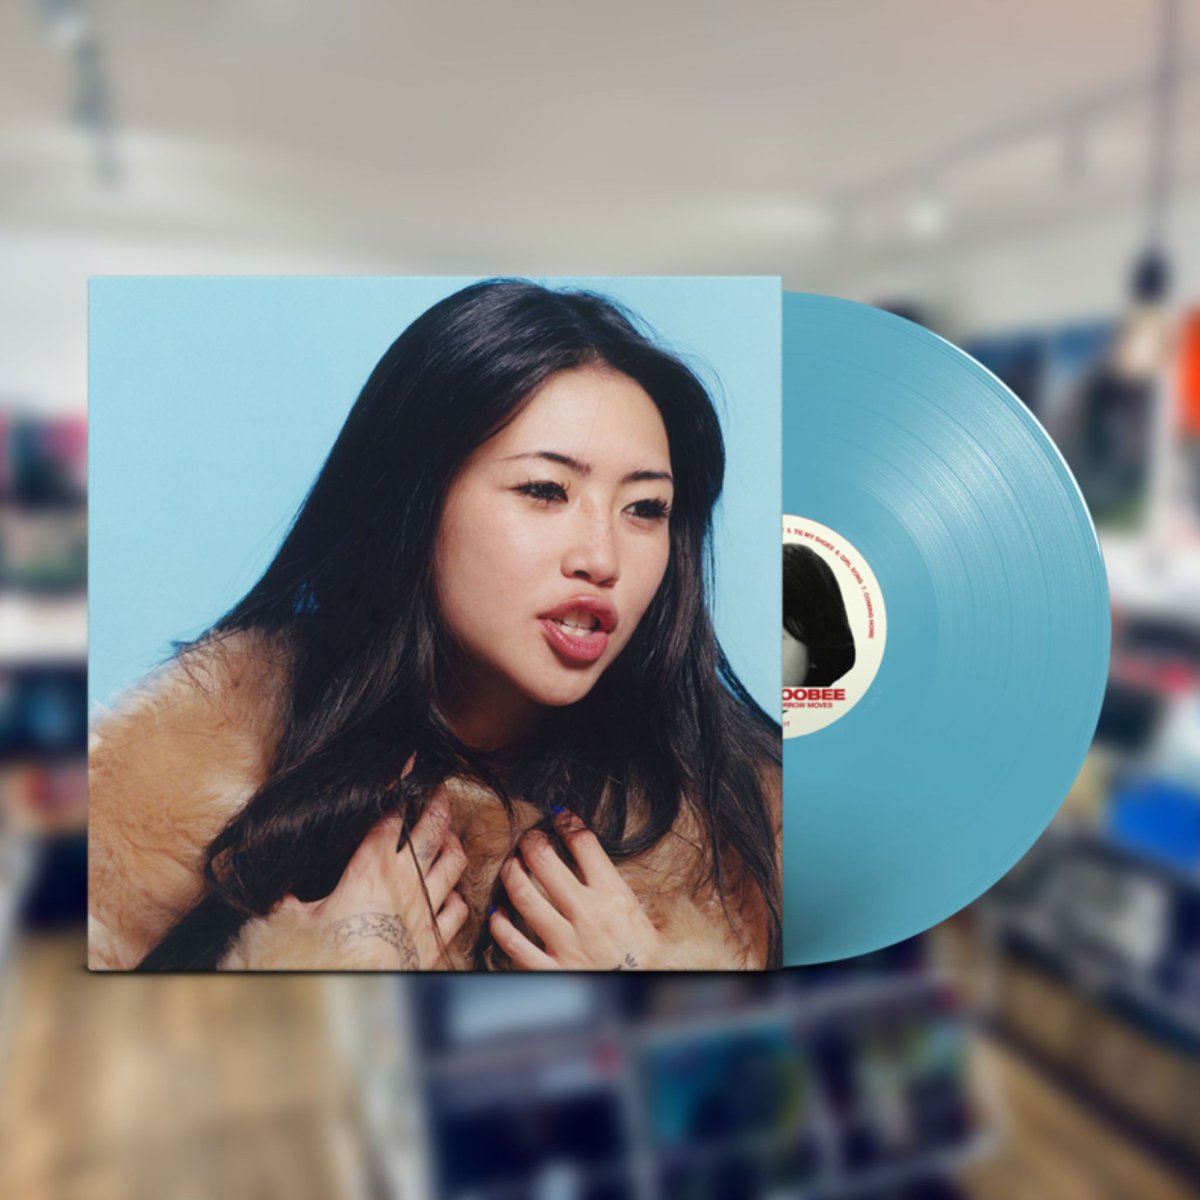 *NEW BEABADOOBEE* @beabad00bee is back! Brand new album #ThisIsHowTomorrowMoves is out on 16/08 We CANNOT WAIT!!! You can pre-order the album on indies light blue vinyl now: tinyurl.com/beabasssai #beabadoobee 💙